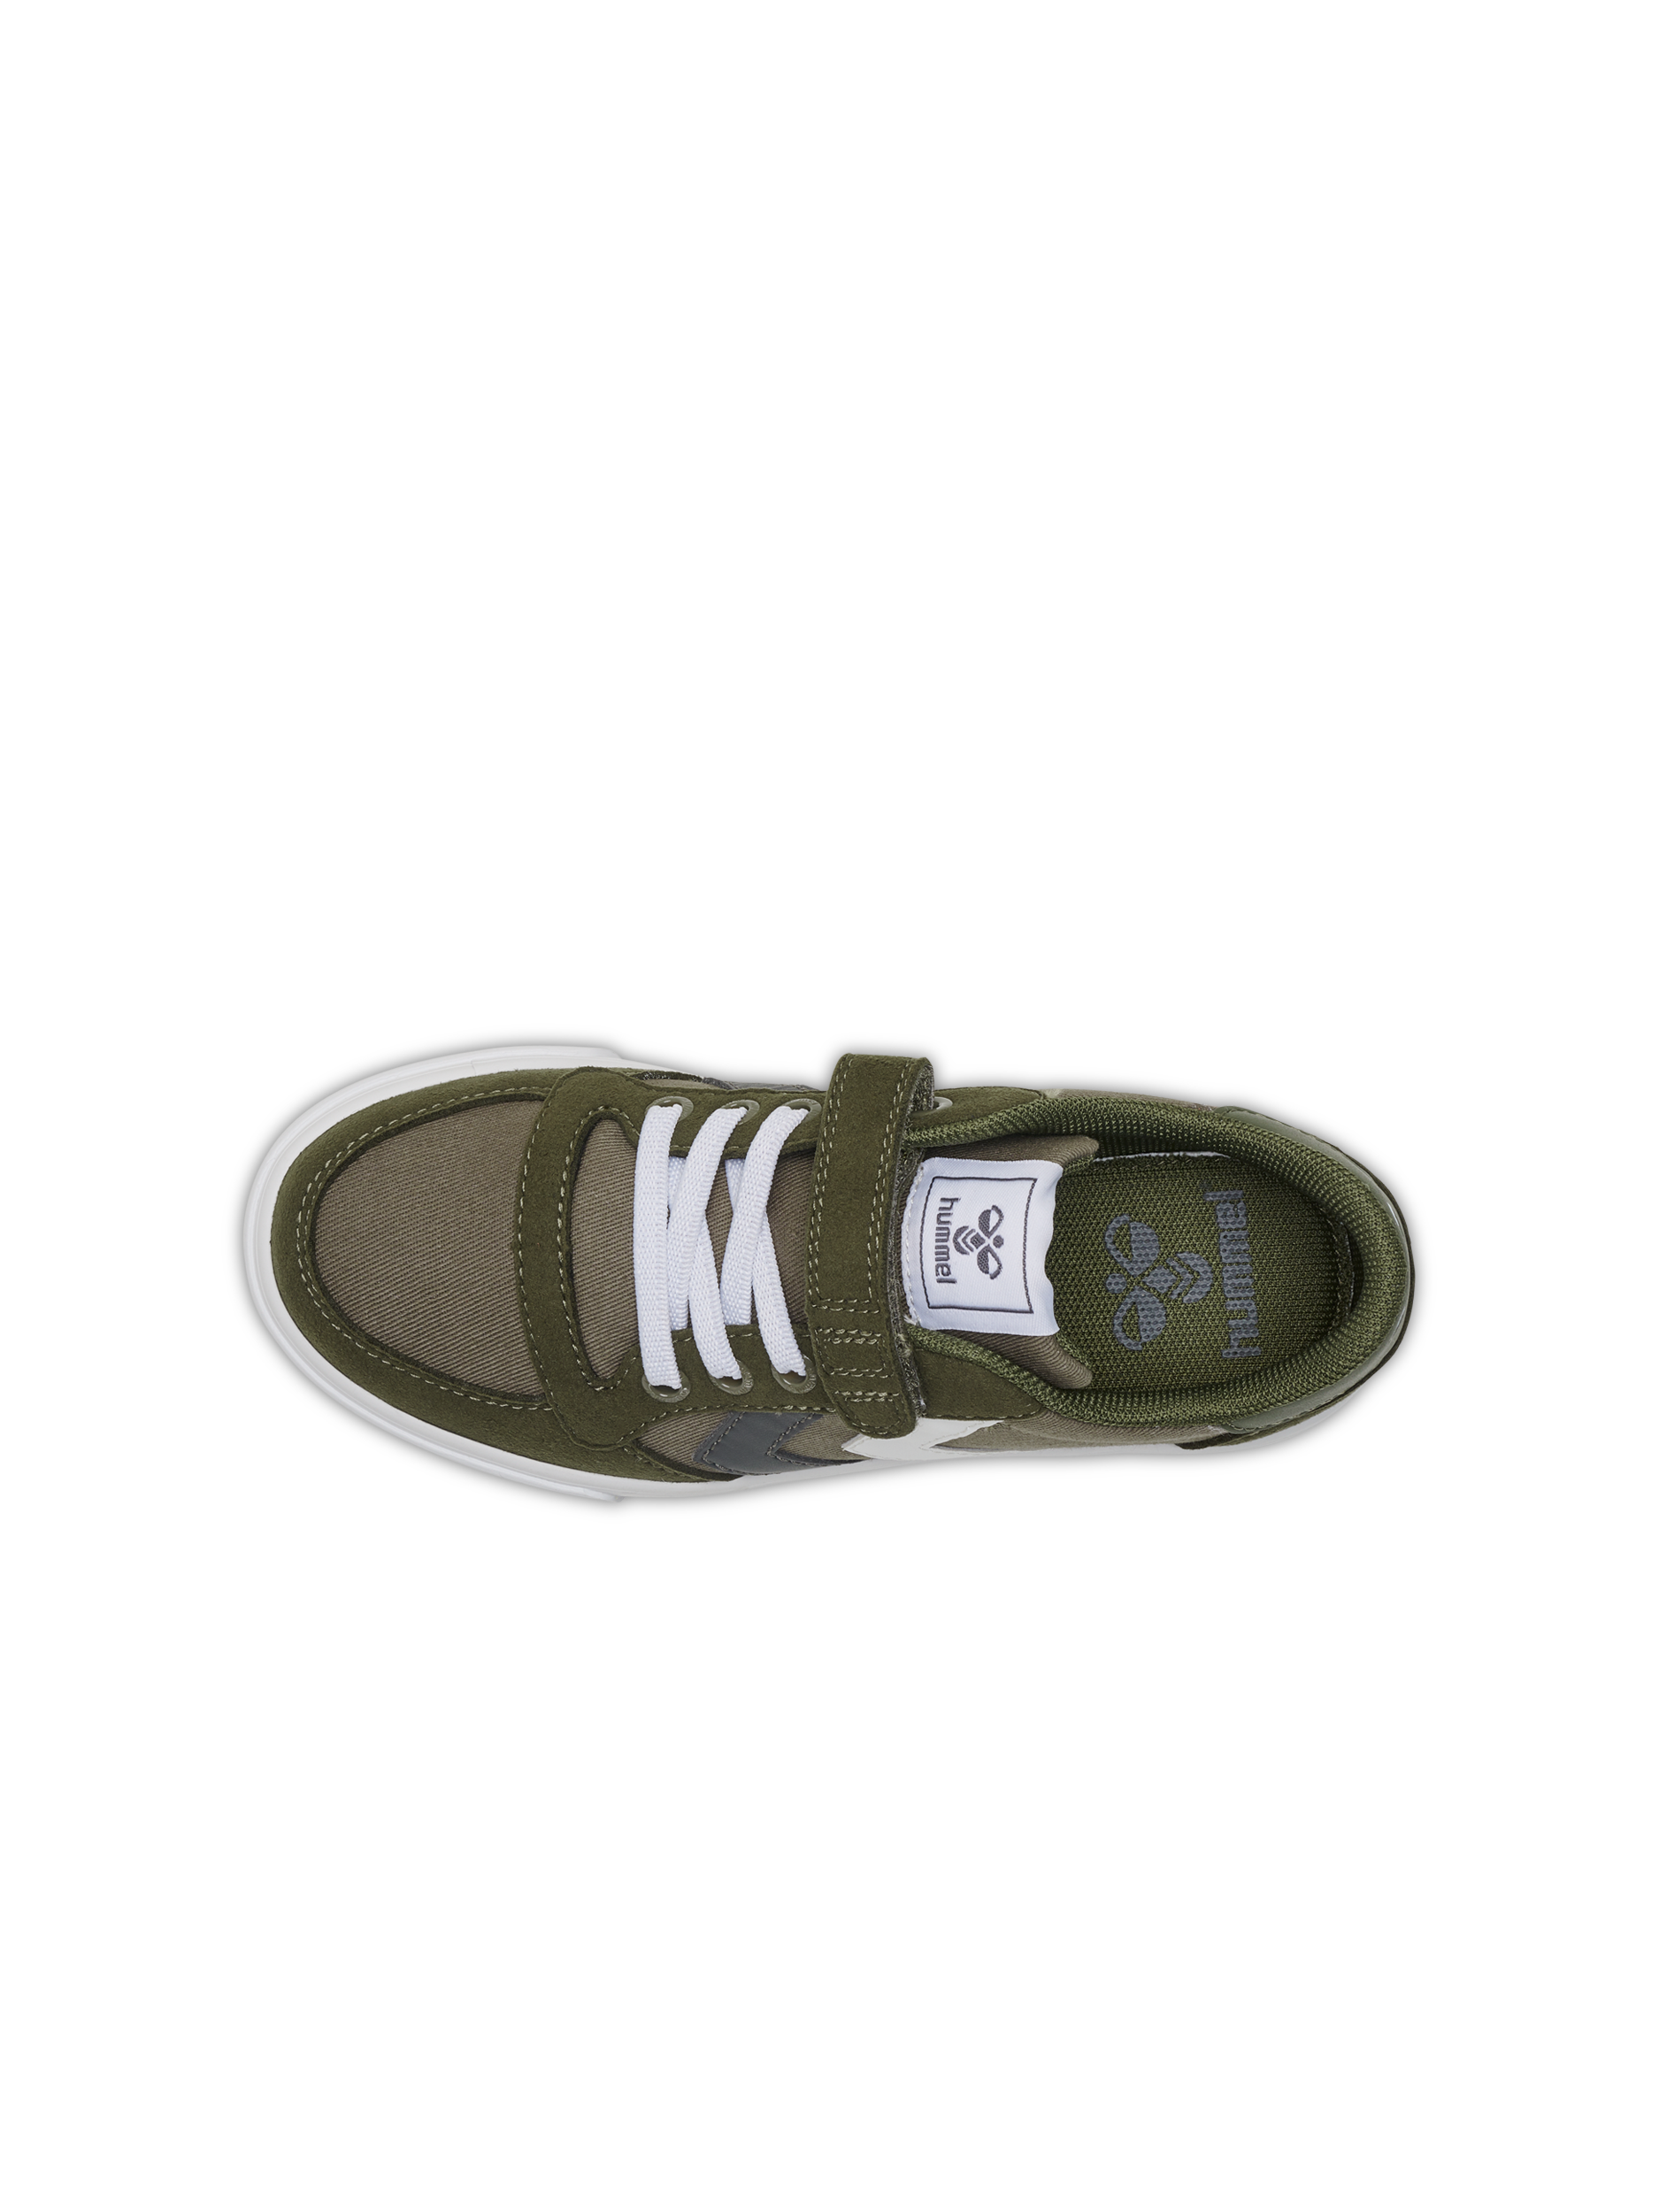 43 EU Details about   hummel Nile Low Mens Olive Casual Trainers